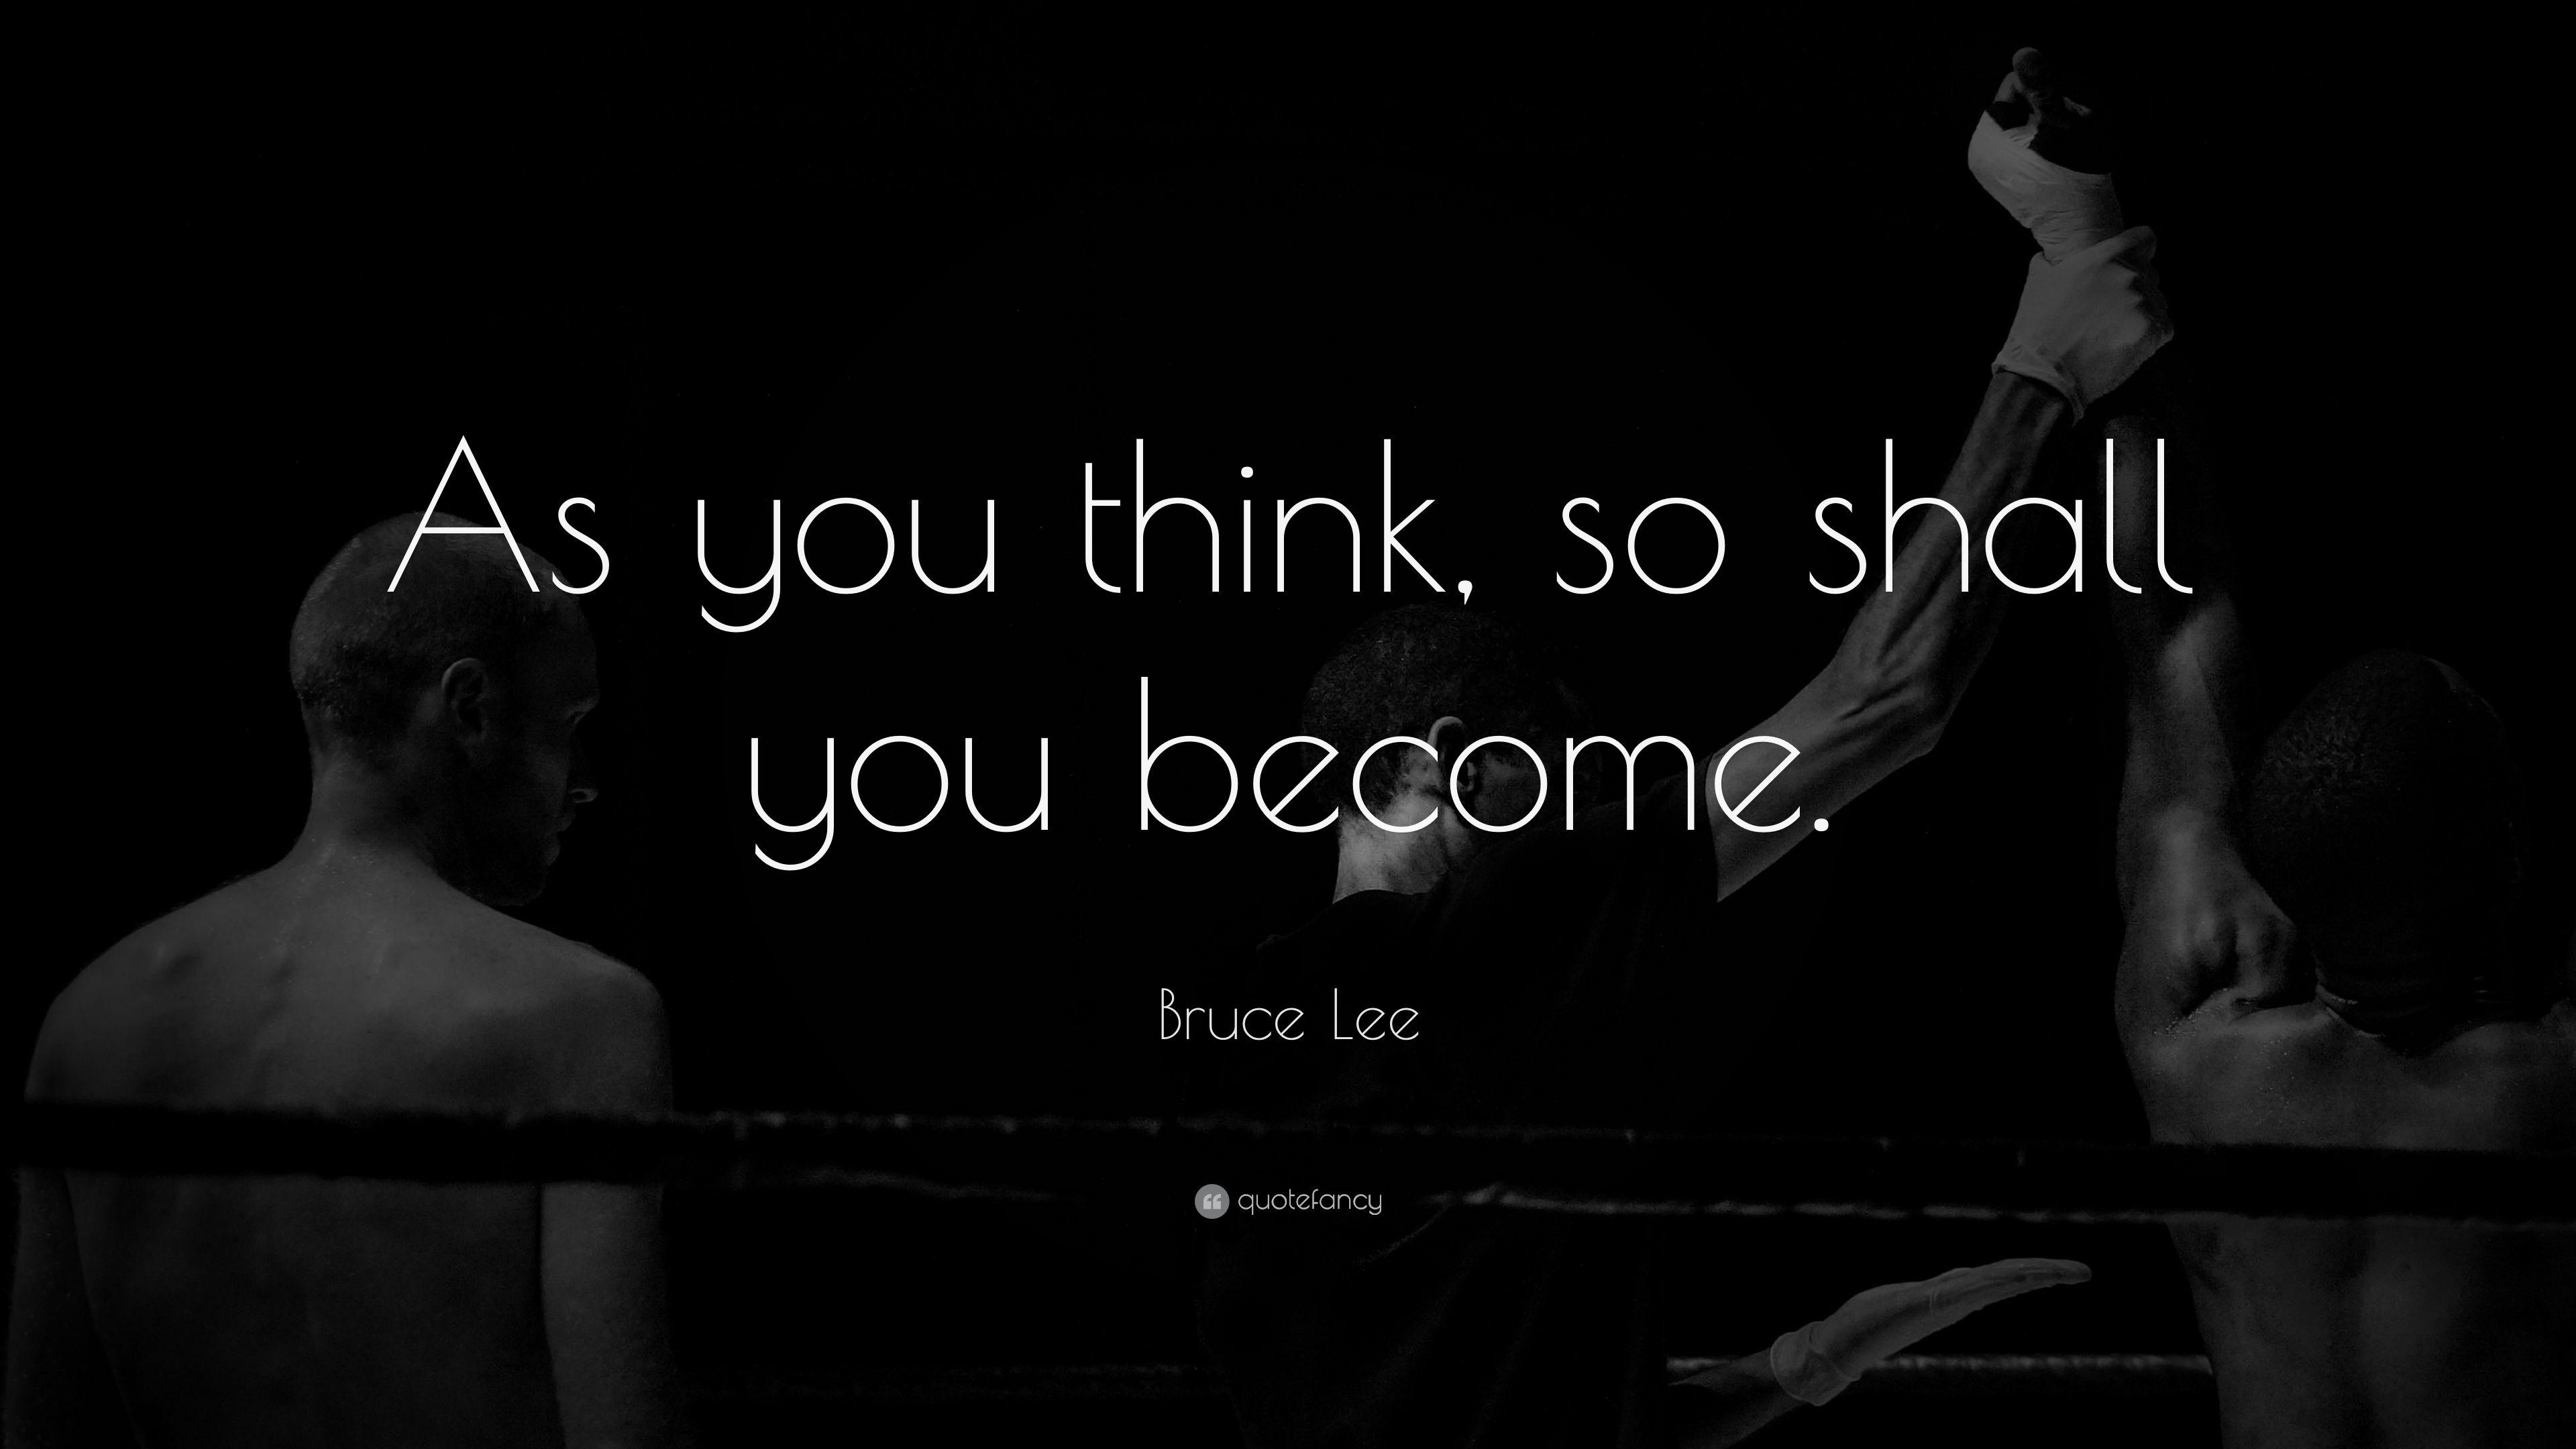 Bruce Lee Quote: “As you think, so shall you become.” 25